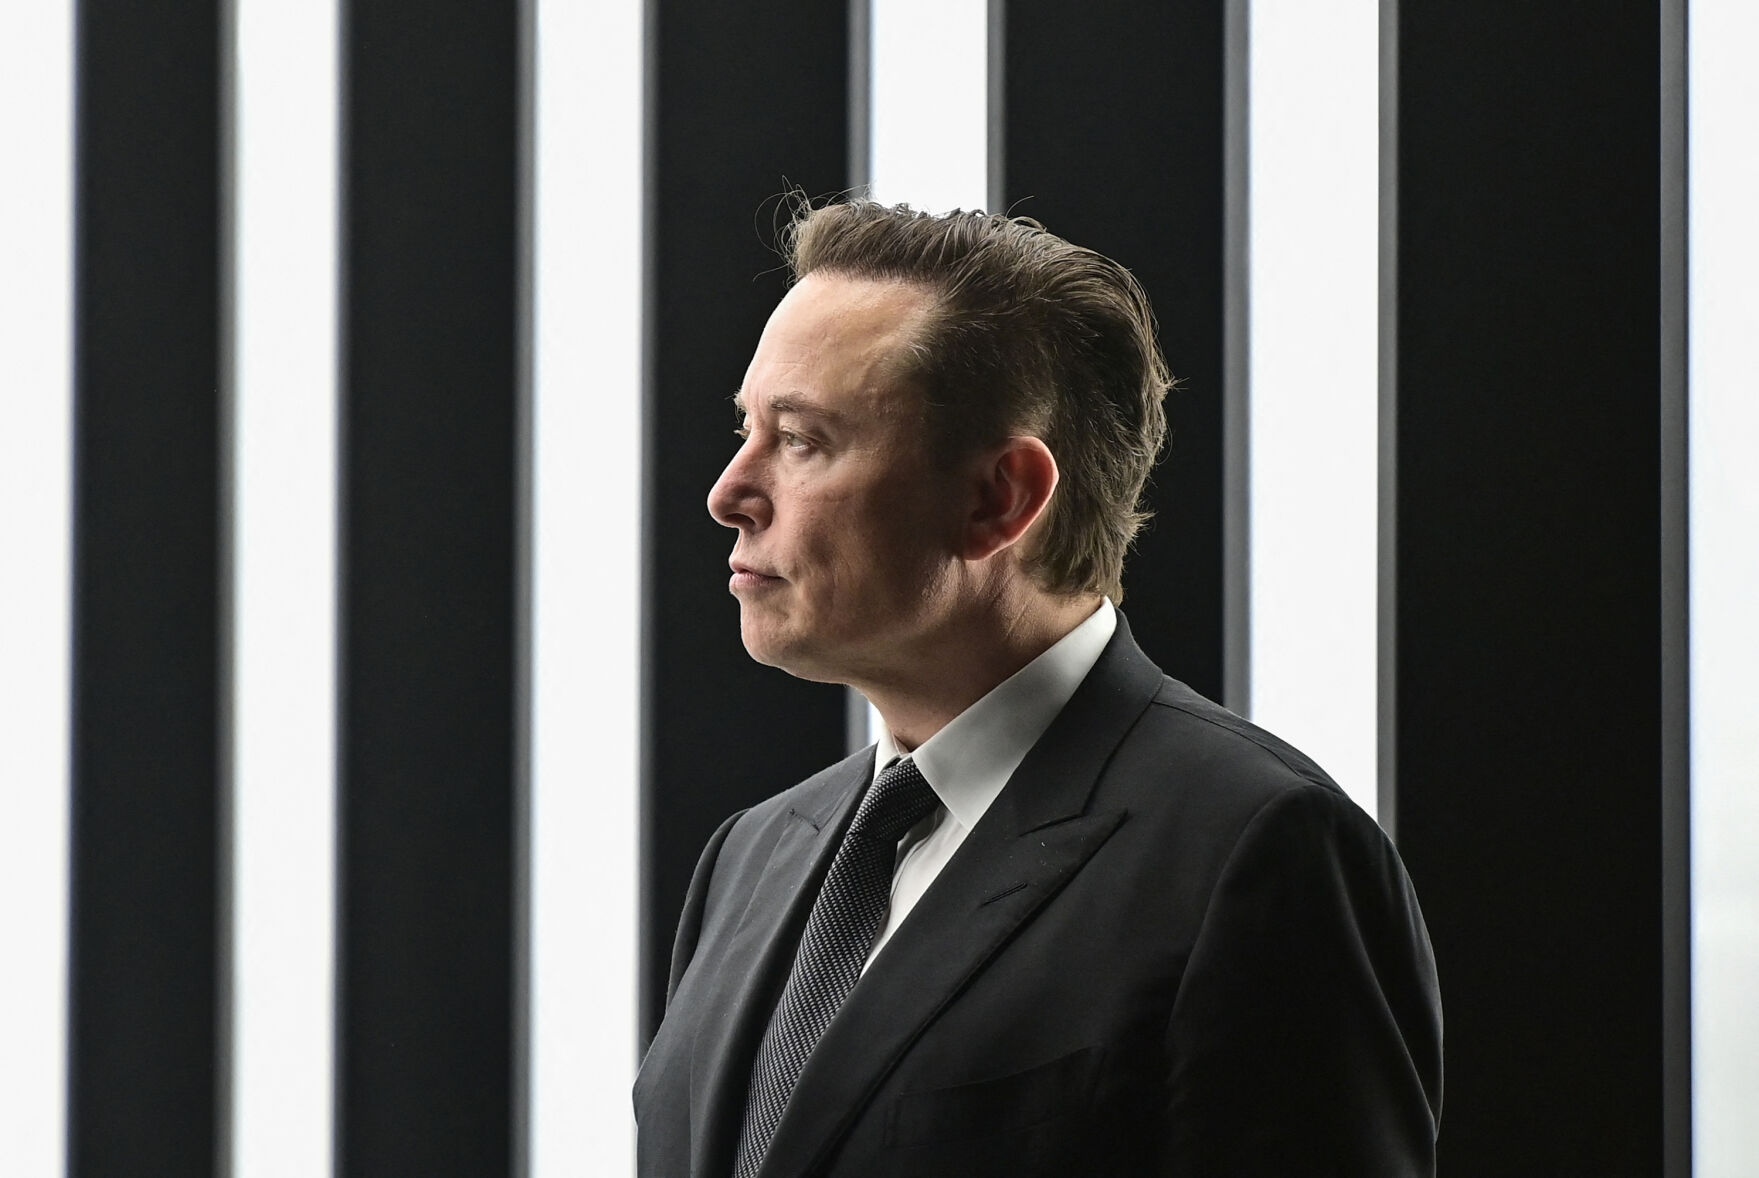 Tesla CEO Elon Musk attends the start of the production at Tesla